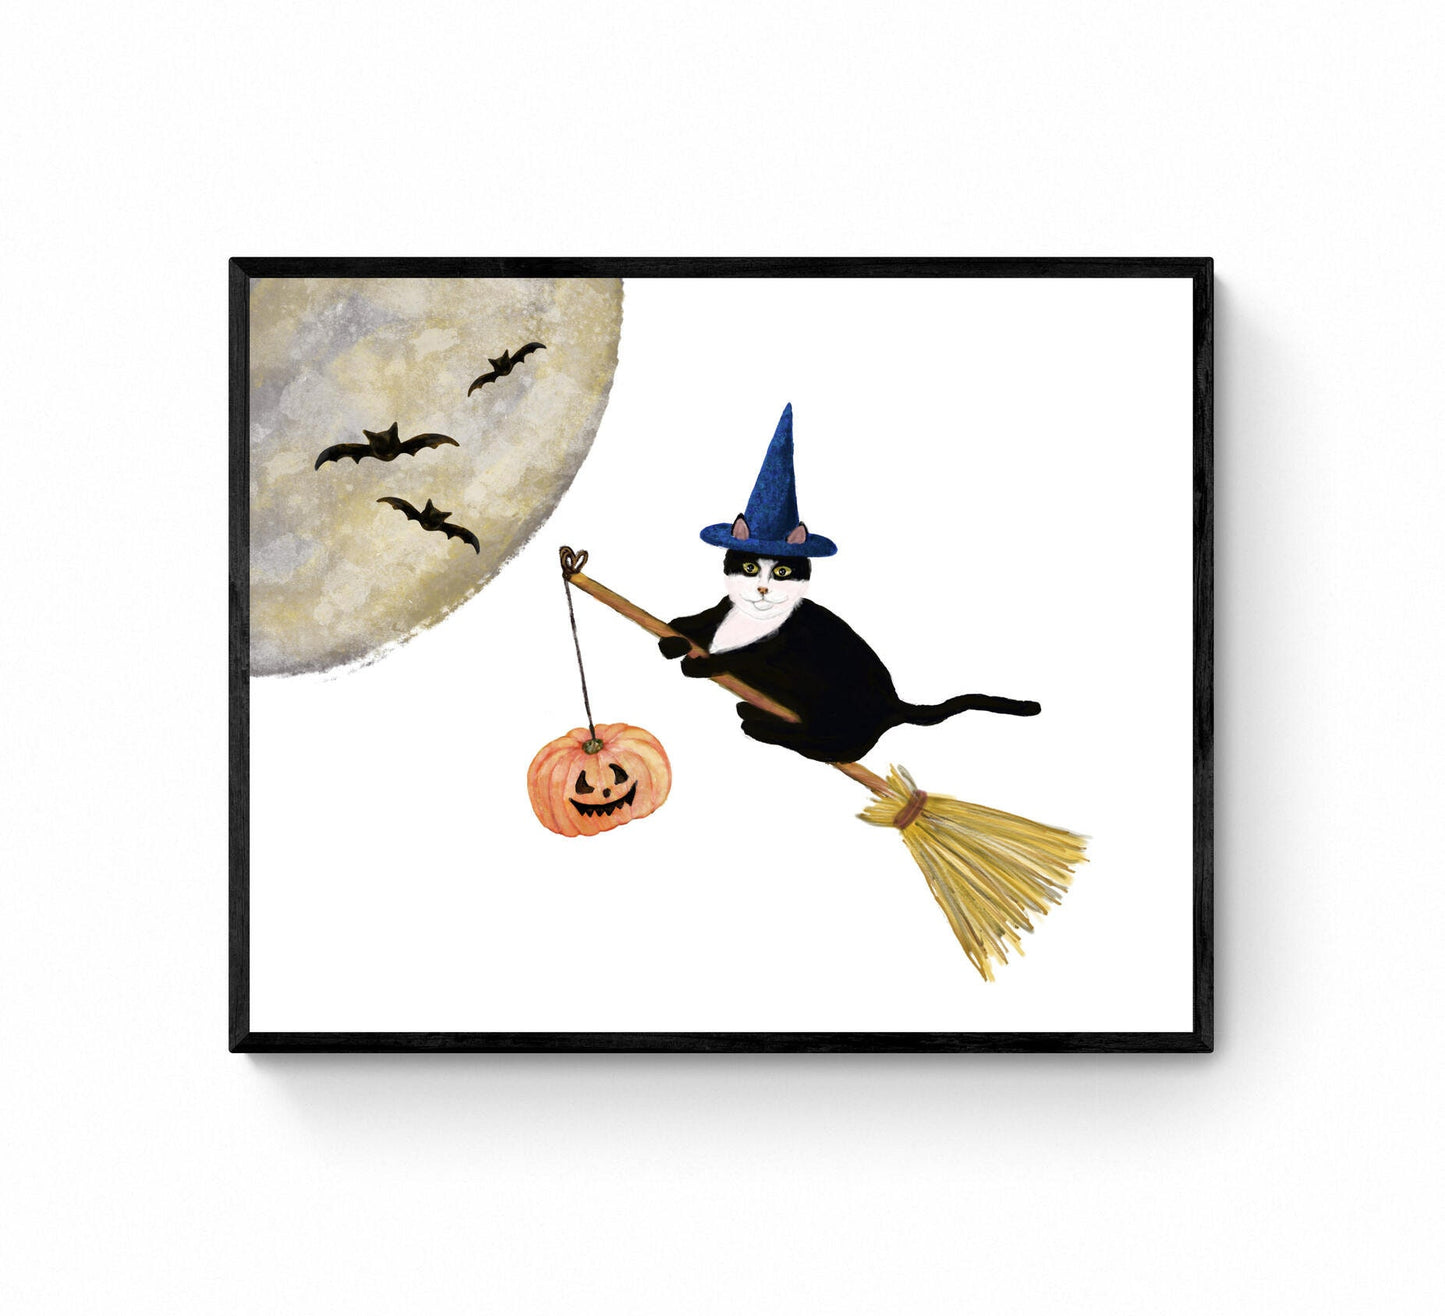 Tuxedo Cat Flying with a Broom Print, Halloween Cat Painting, Black and White Cat Portrait, Holiday Wall Art, Tuxedo Cat Flying with Bats